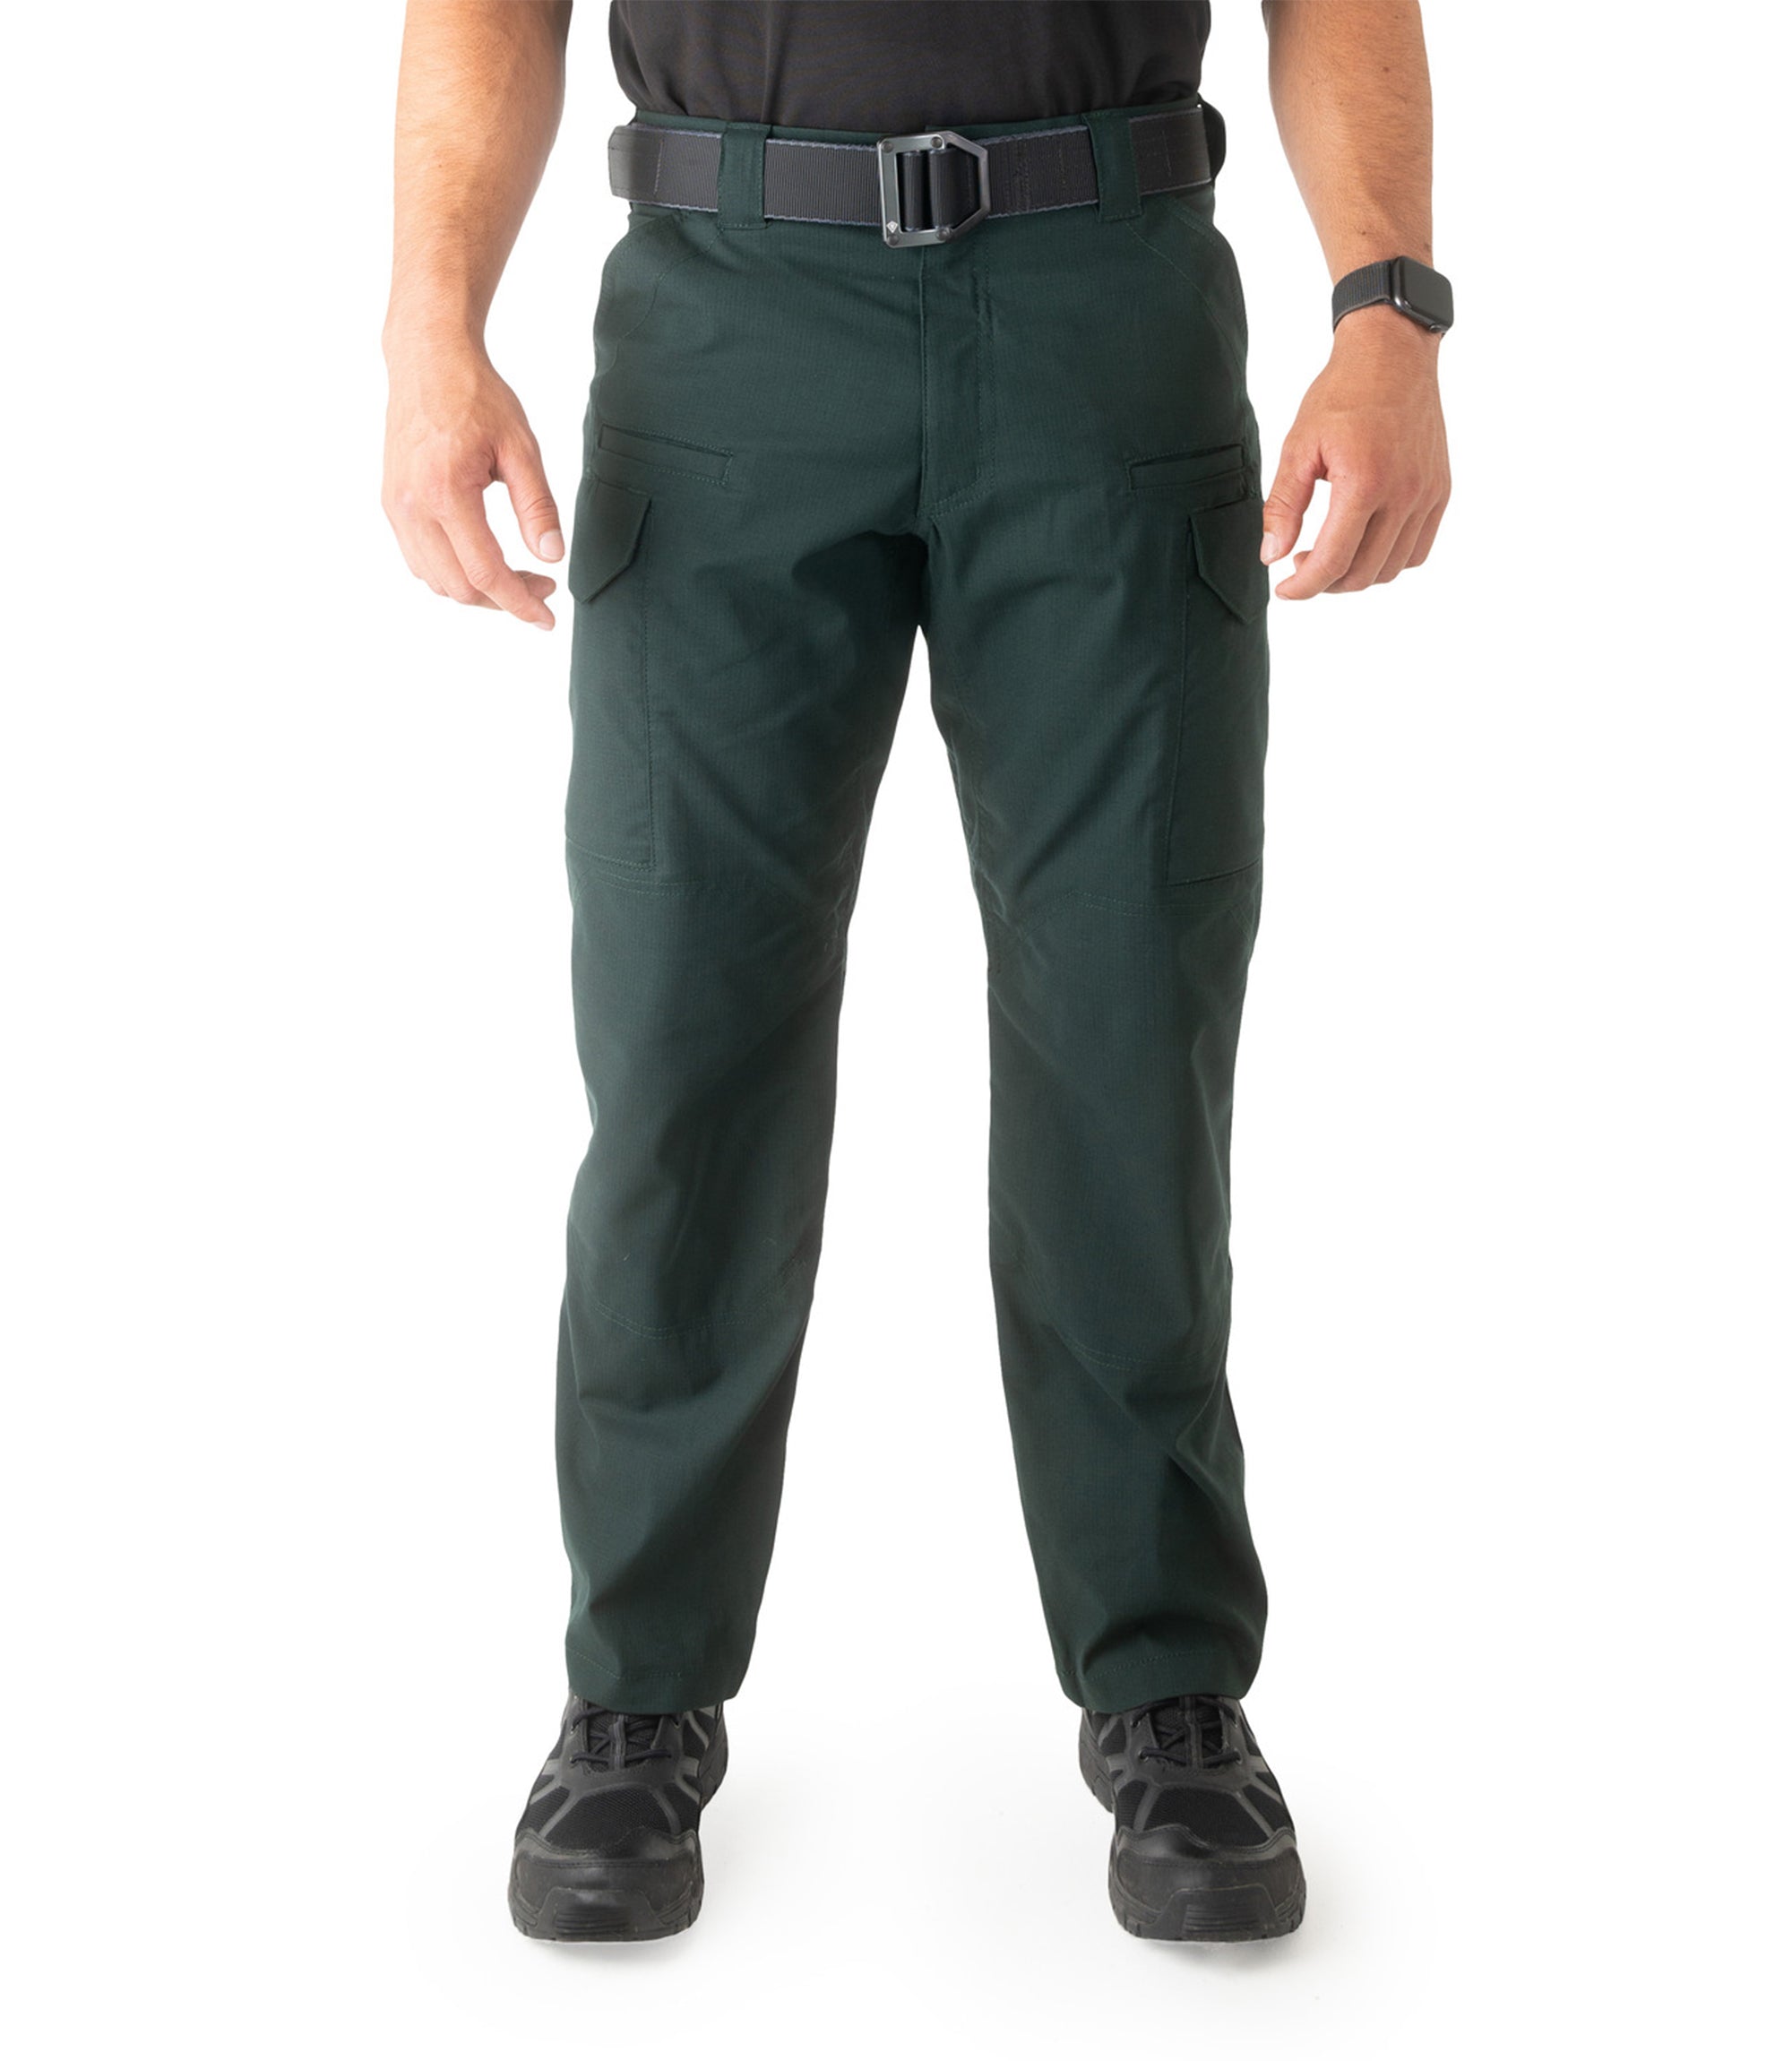 Men's V2 Tactical Pants / Spruce Green – First Tactical